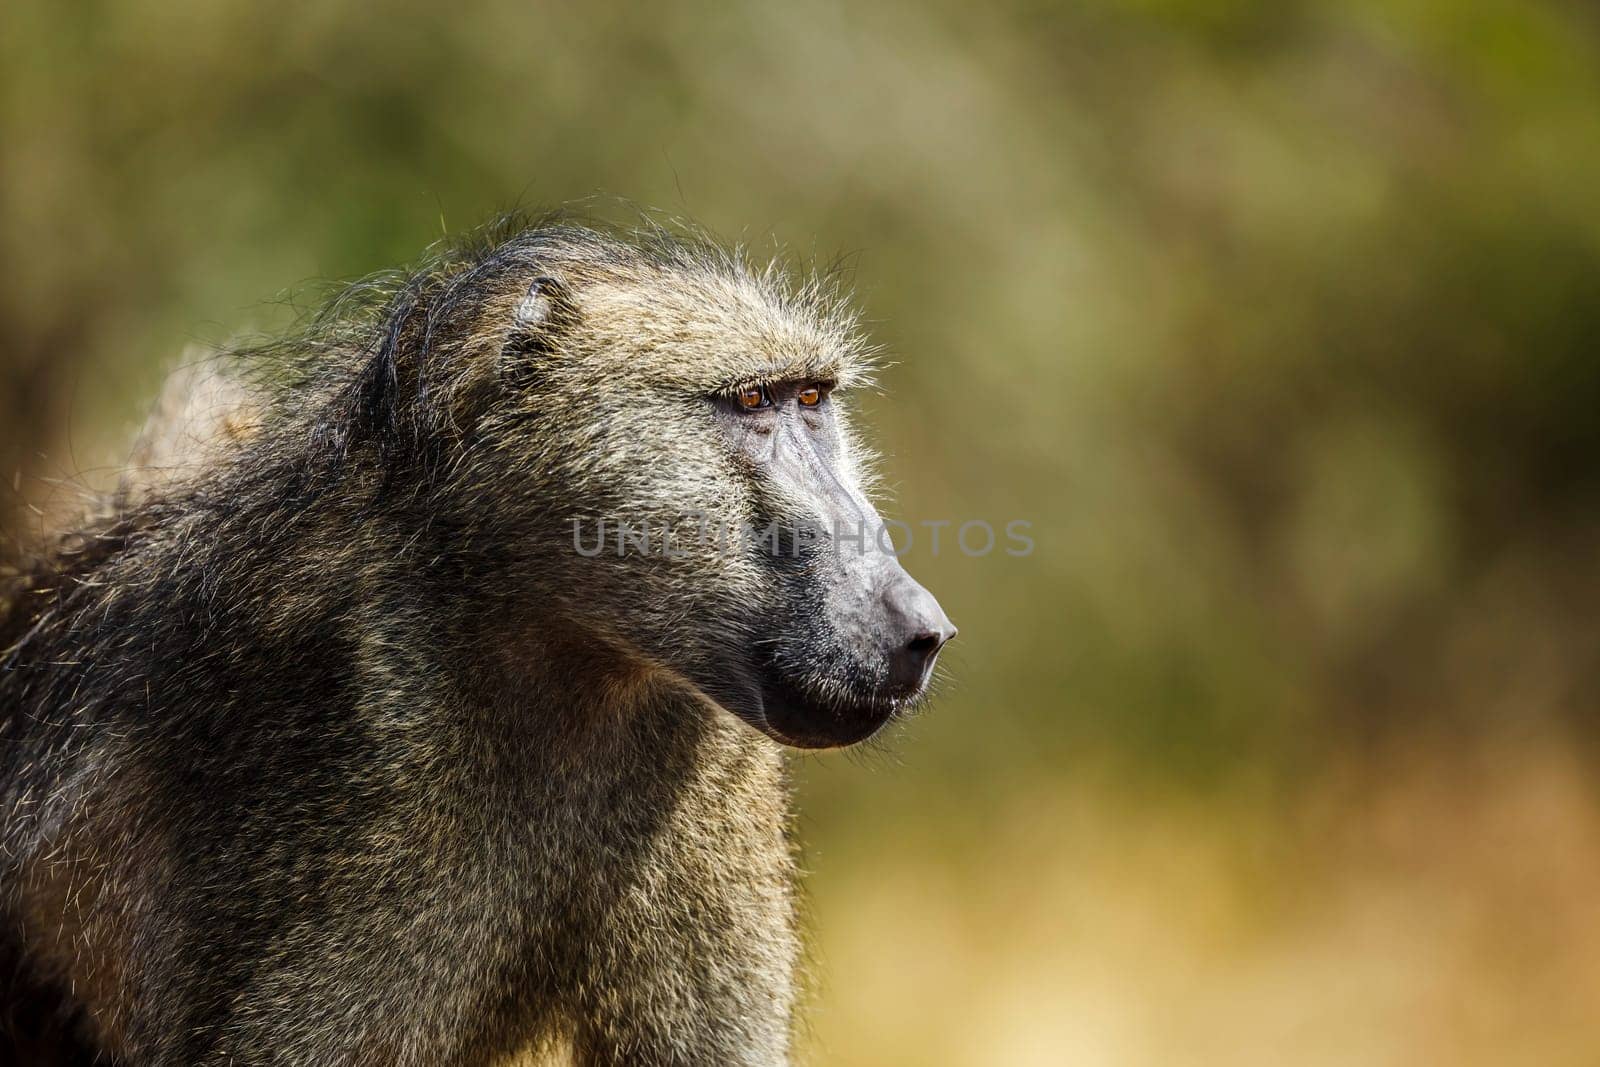 Chacma baboon portrait isolated in natural background in Kruger National park, South Africa ; Specie Papio ursinus family of Cercopithecidae